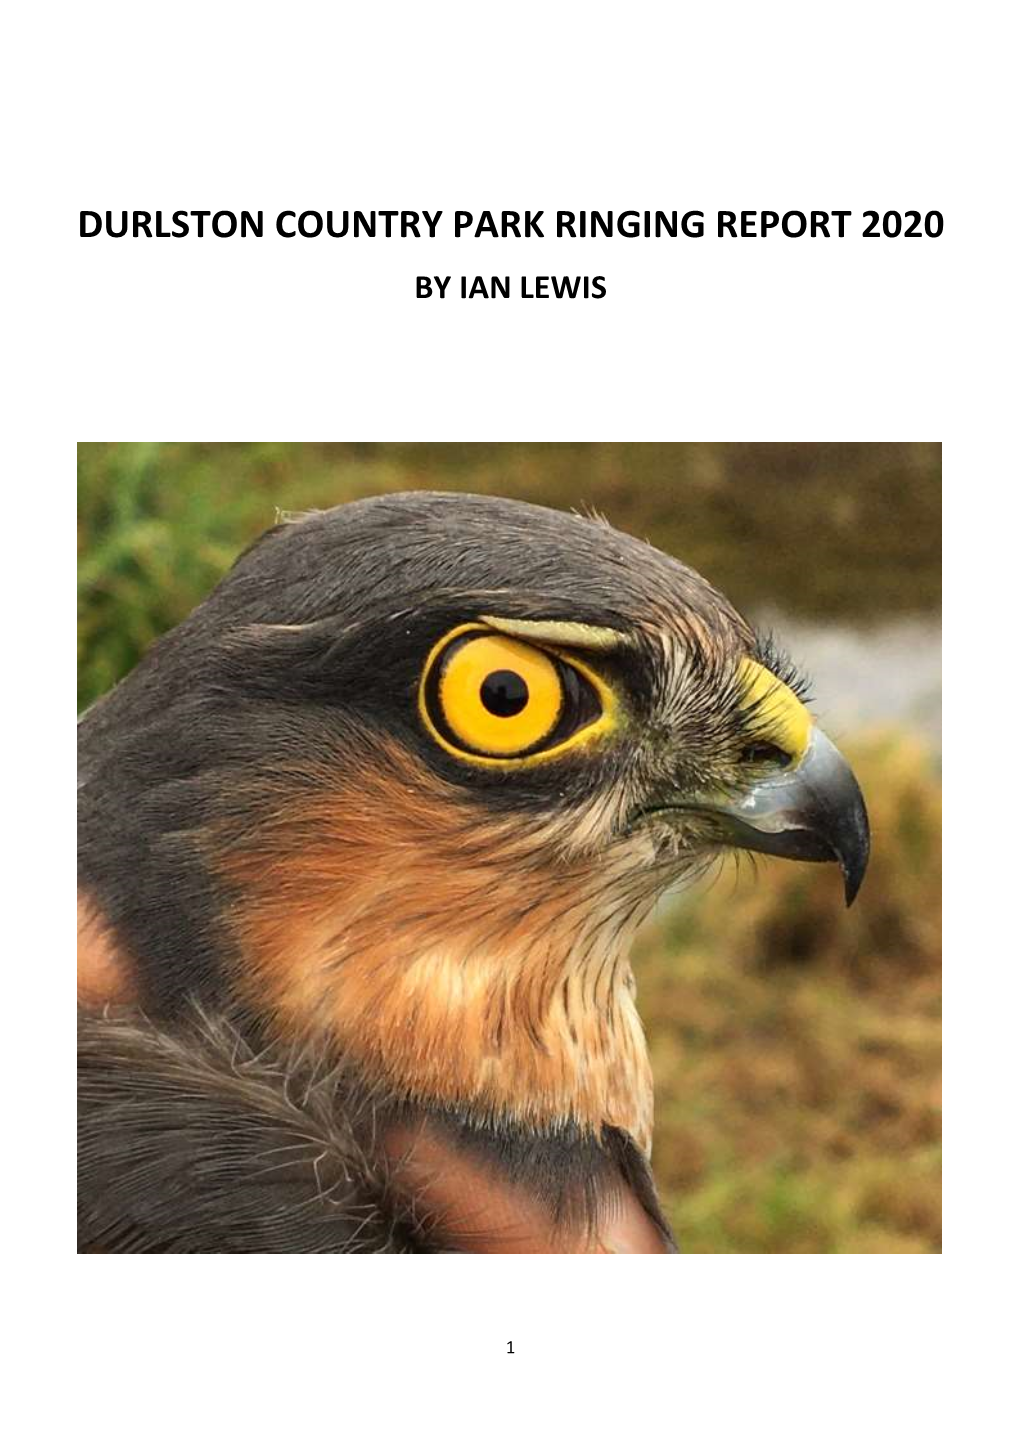 Durlston Country Park Ringing Report 2020 by Ian Lewis